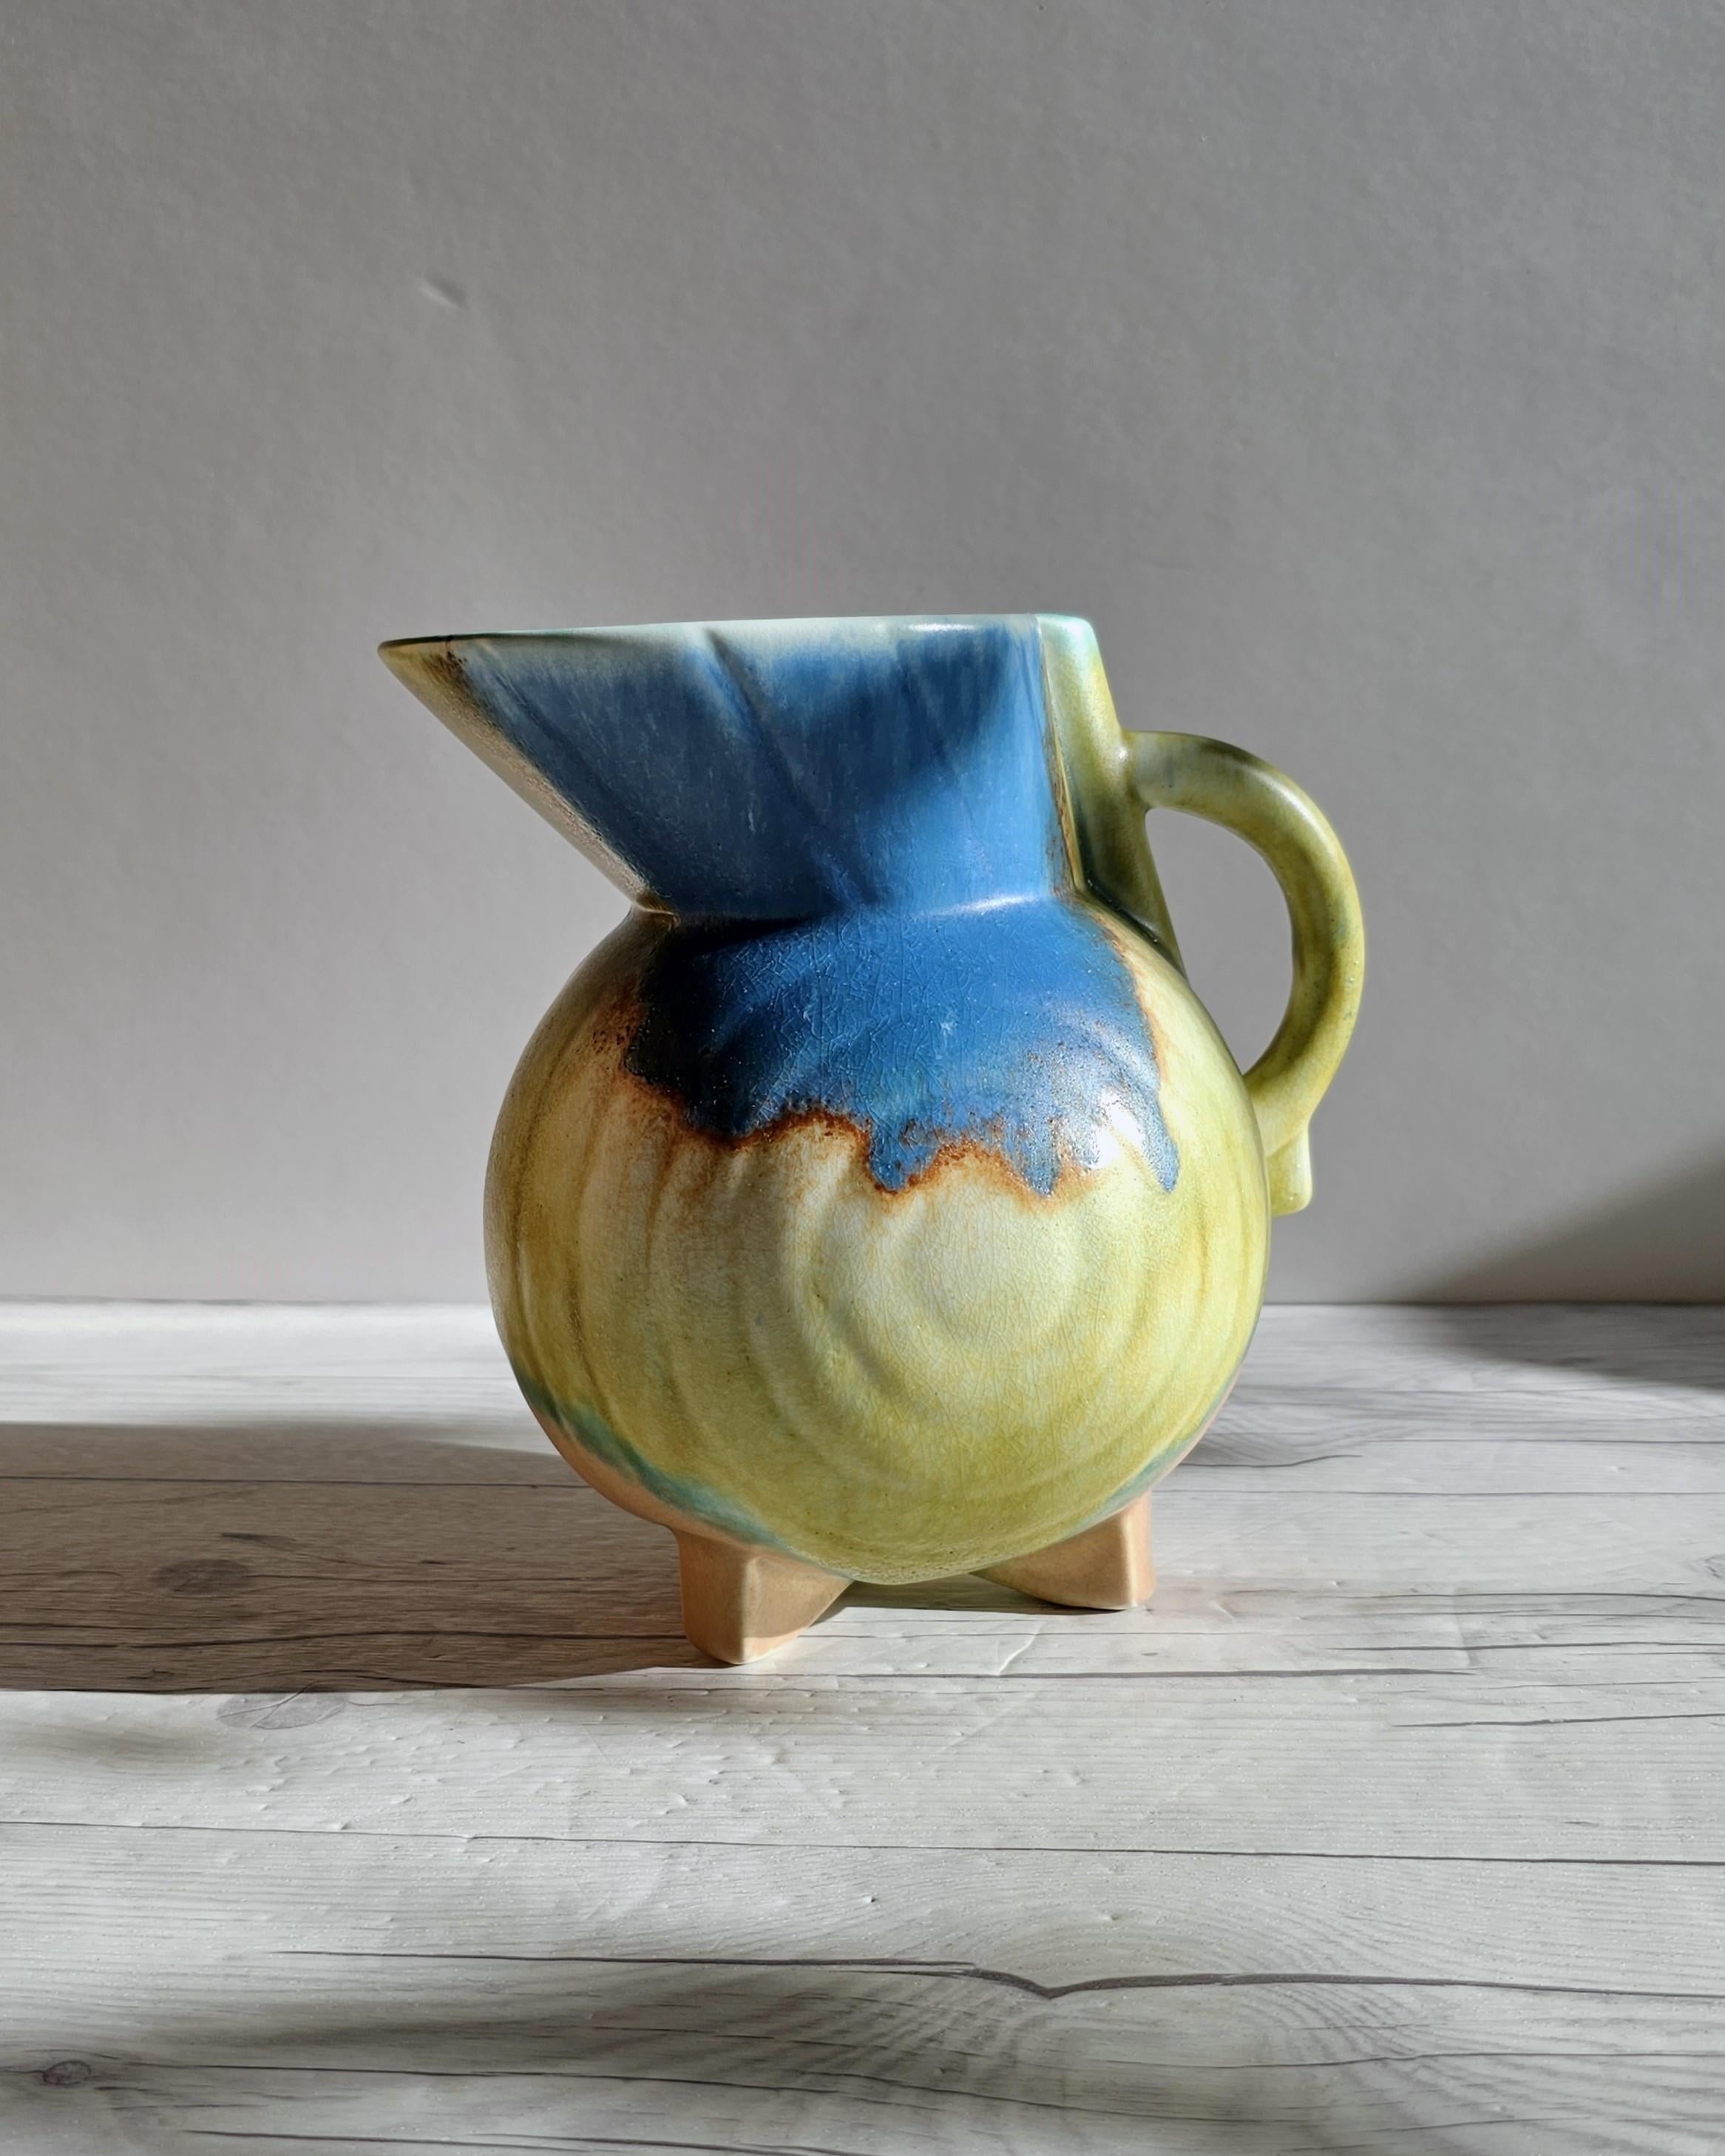 This subtly bold work of Art Deco design is British pottery Beswick. With strong curves that infer Streamline Moderne, the international style of Art Deco that emerged in the 1930s was inspired by aerodynamic design. The elevated and sharp